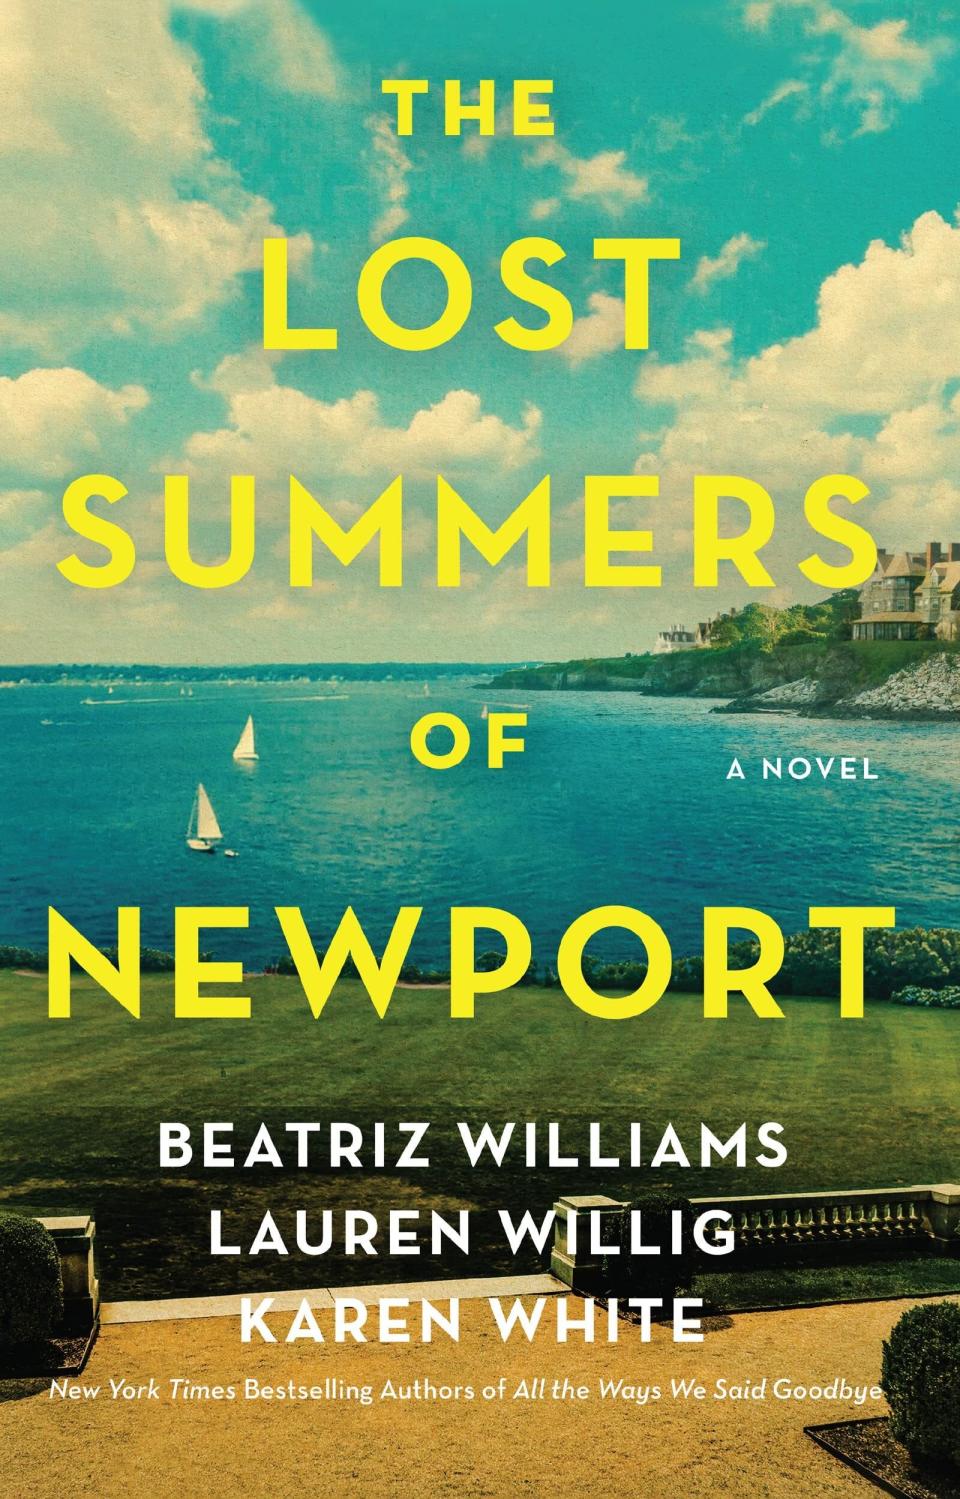 "The Lost Summers of Newport" follows three women in storylines set in 1899, 1958 and 2019, connected by a fictional Newport mansion.